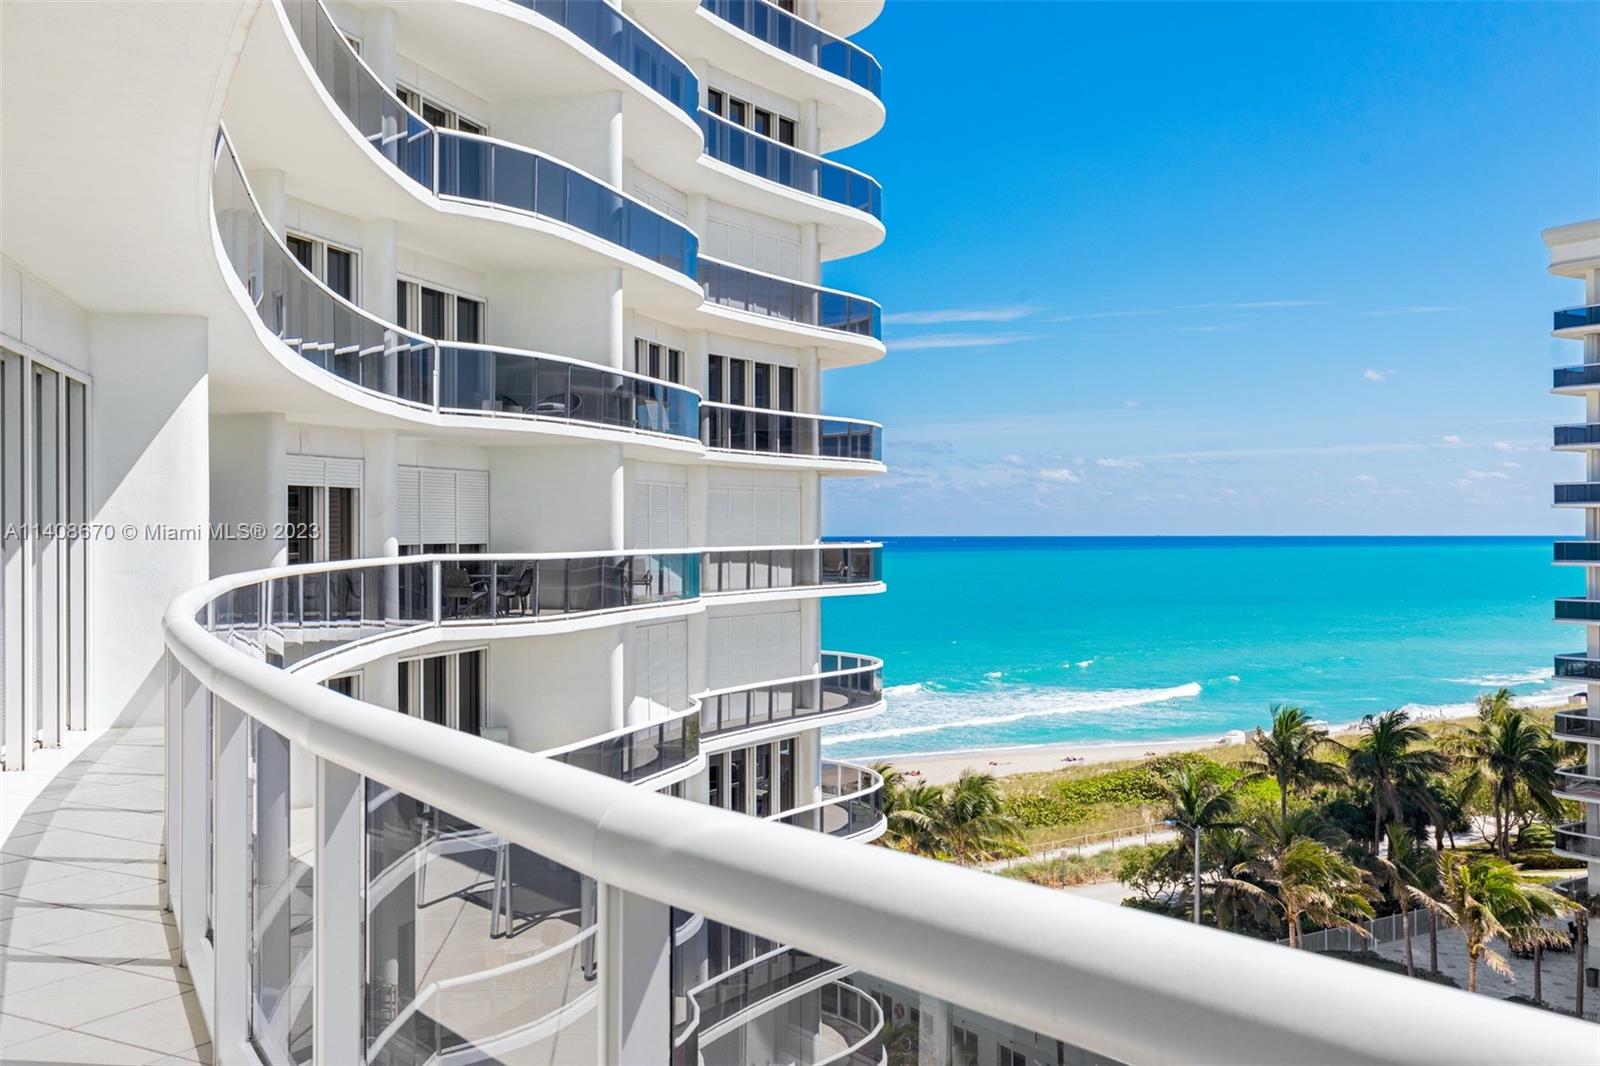 Prestigious Oceanfront Majestic building - Bal Harbour. Take advantage of spectacular panoramic city and ocean views from this gorgeous 2-bedroom condo at the Majestic. The units spacious floor plan is perfect for both entertaining and relaxing, features bright and elegant rooms, beautiful marble flooring, and a private elevator. Building amenities include a fitness center, spa, tennis court, and a restaurant. Just steps away from Bal Harbour Shops. As per owner the Unit is 2354 SF.